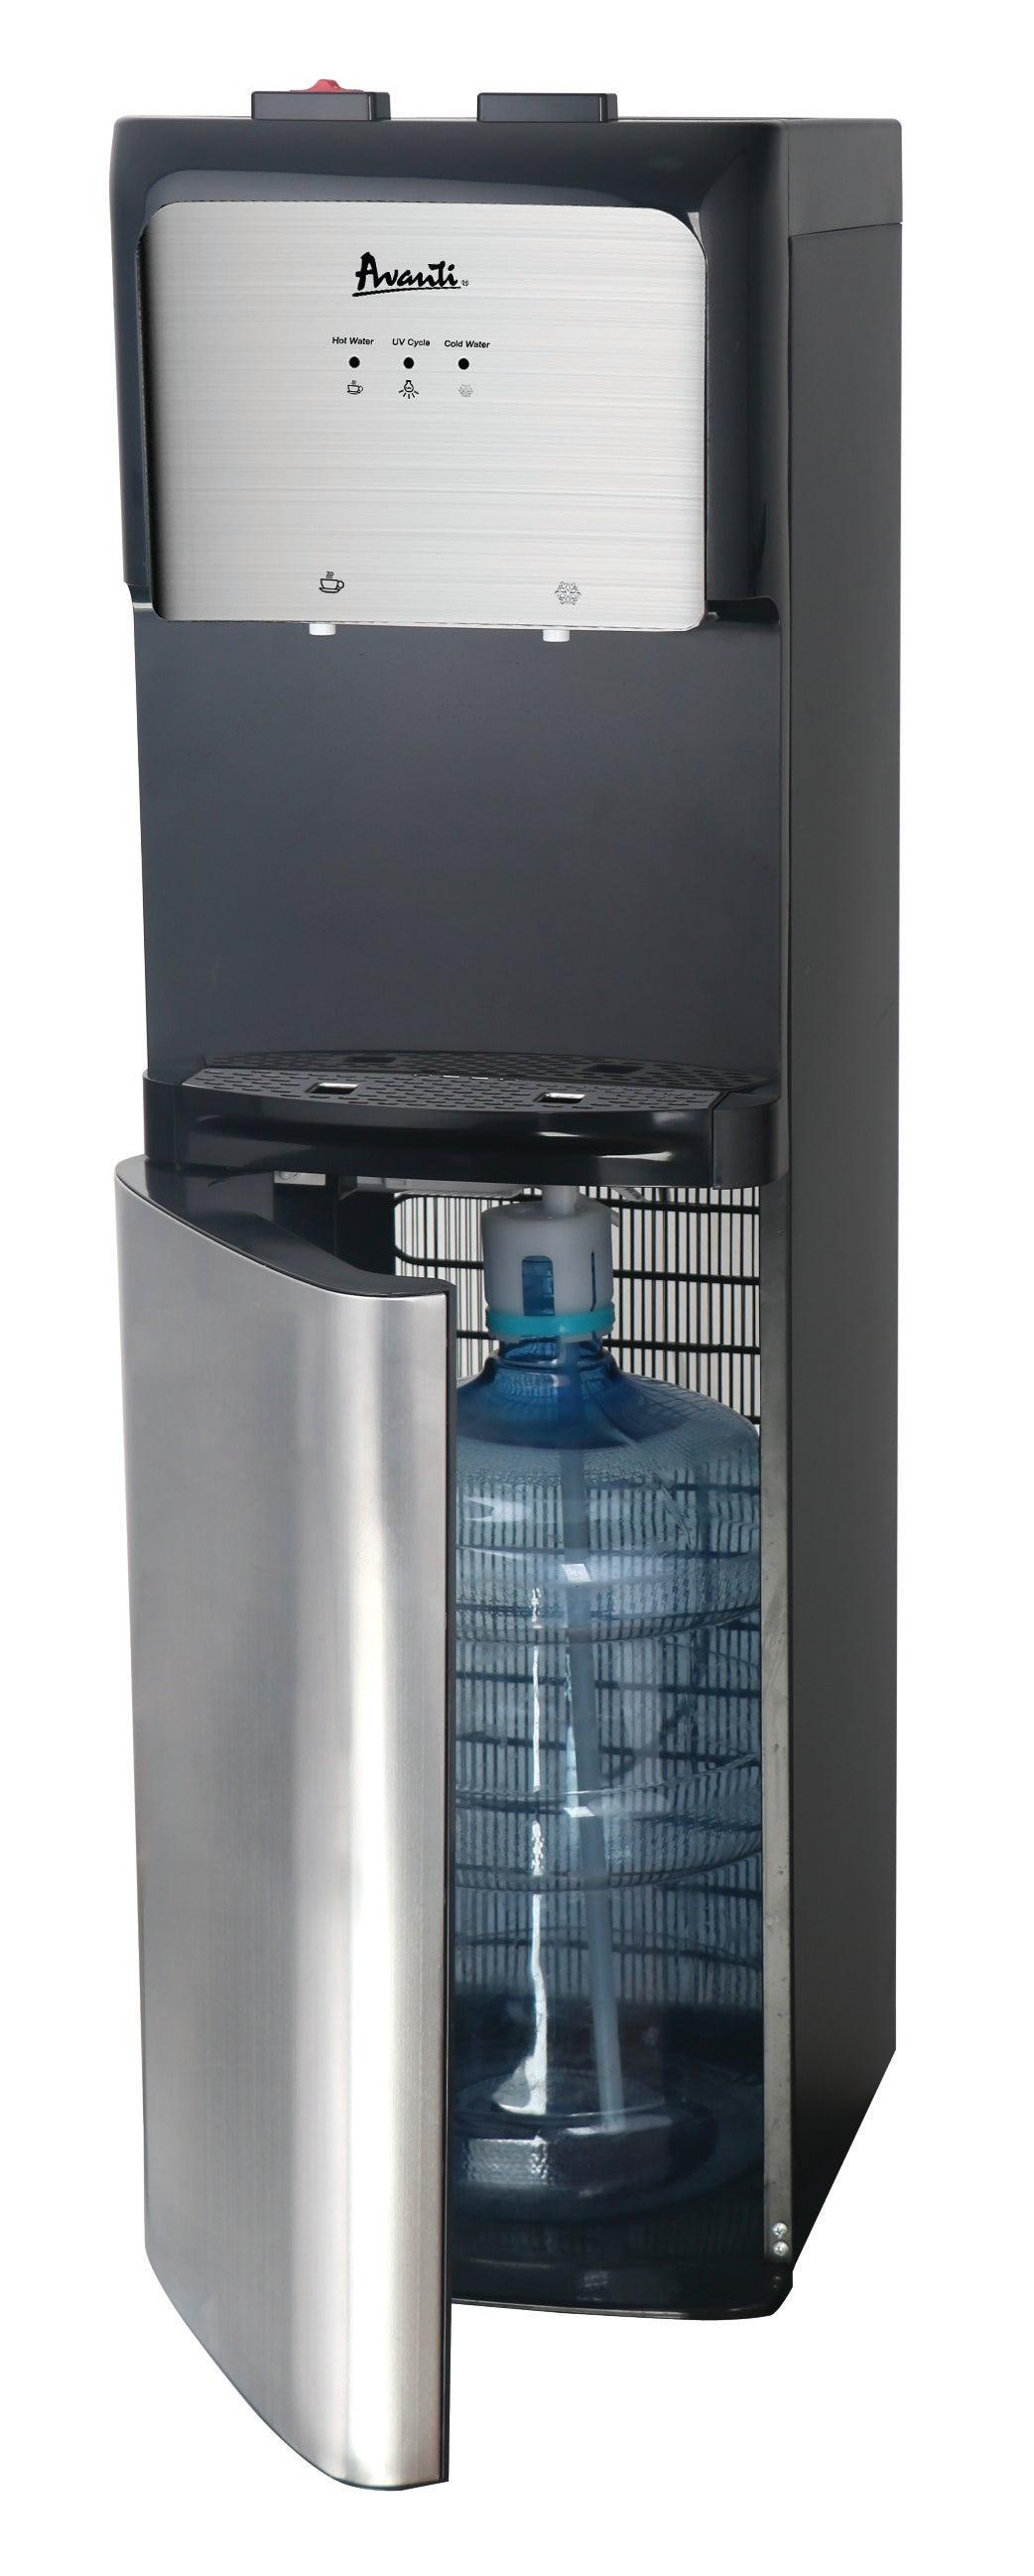 Avanti Bottom Loading Hot and Cold Water Dispenser - Black/Stainless Steel / 3 Gallons or 5 Gallons